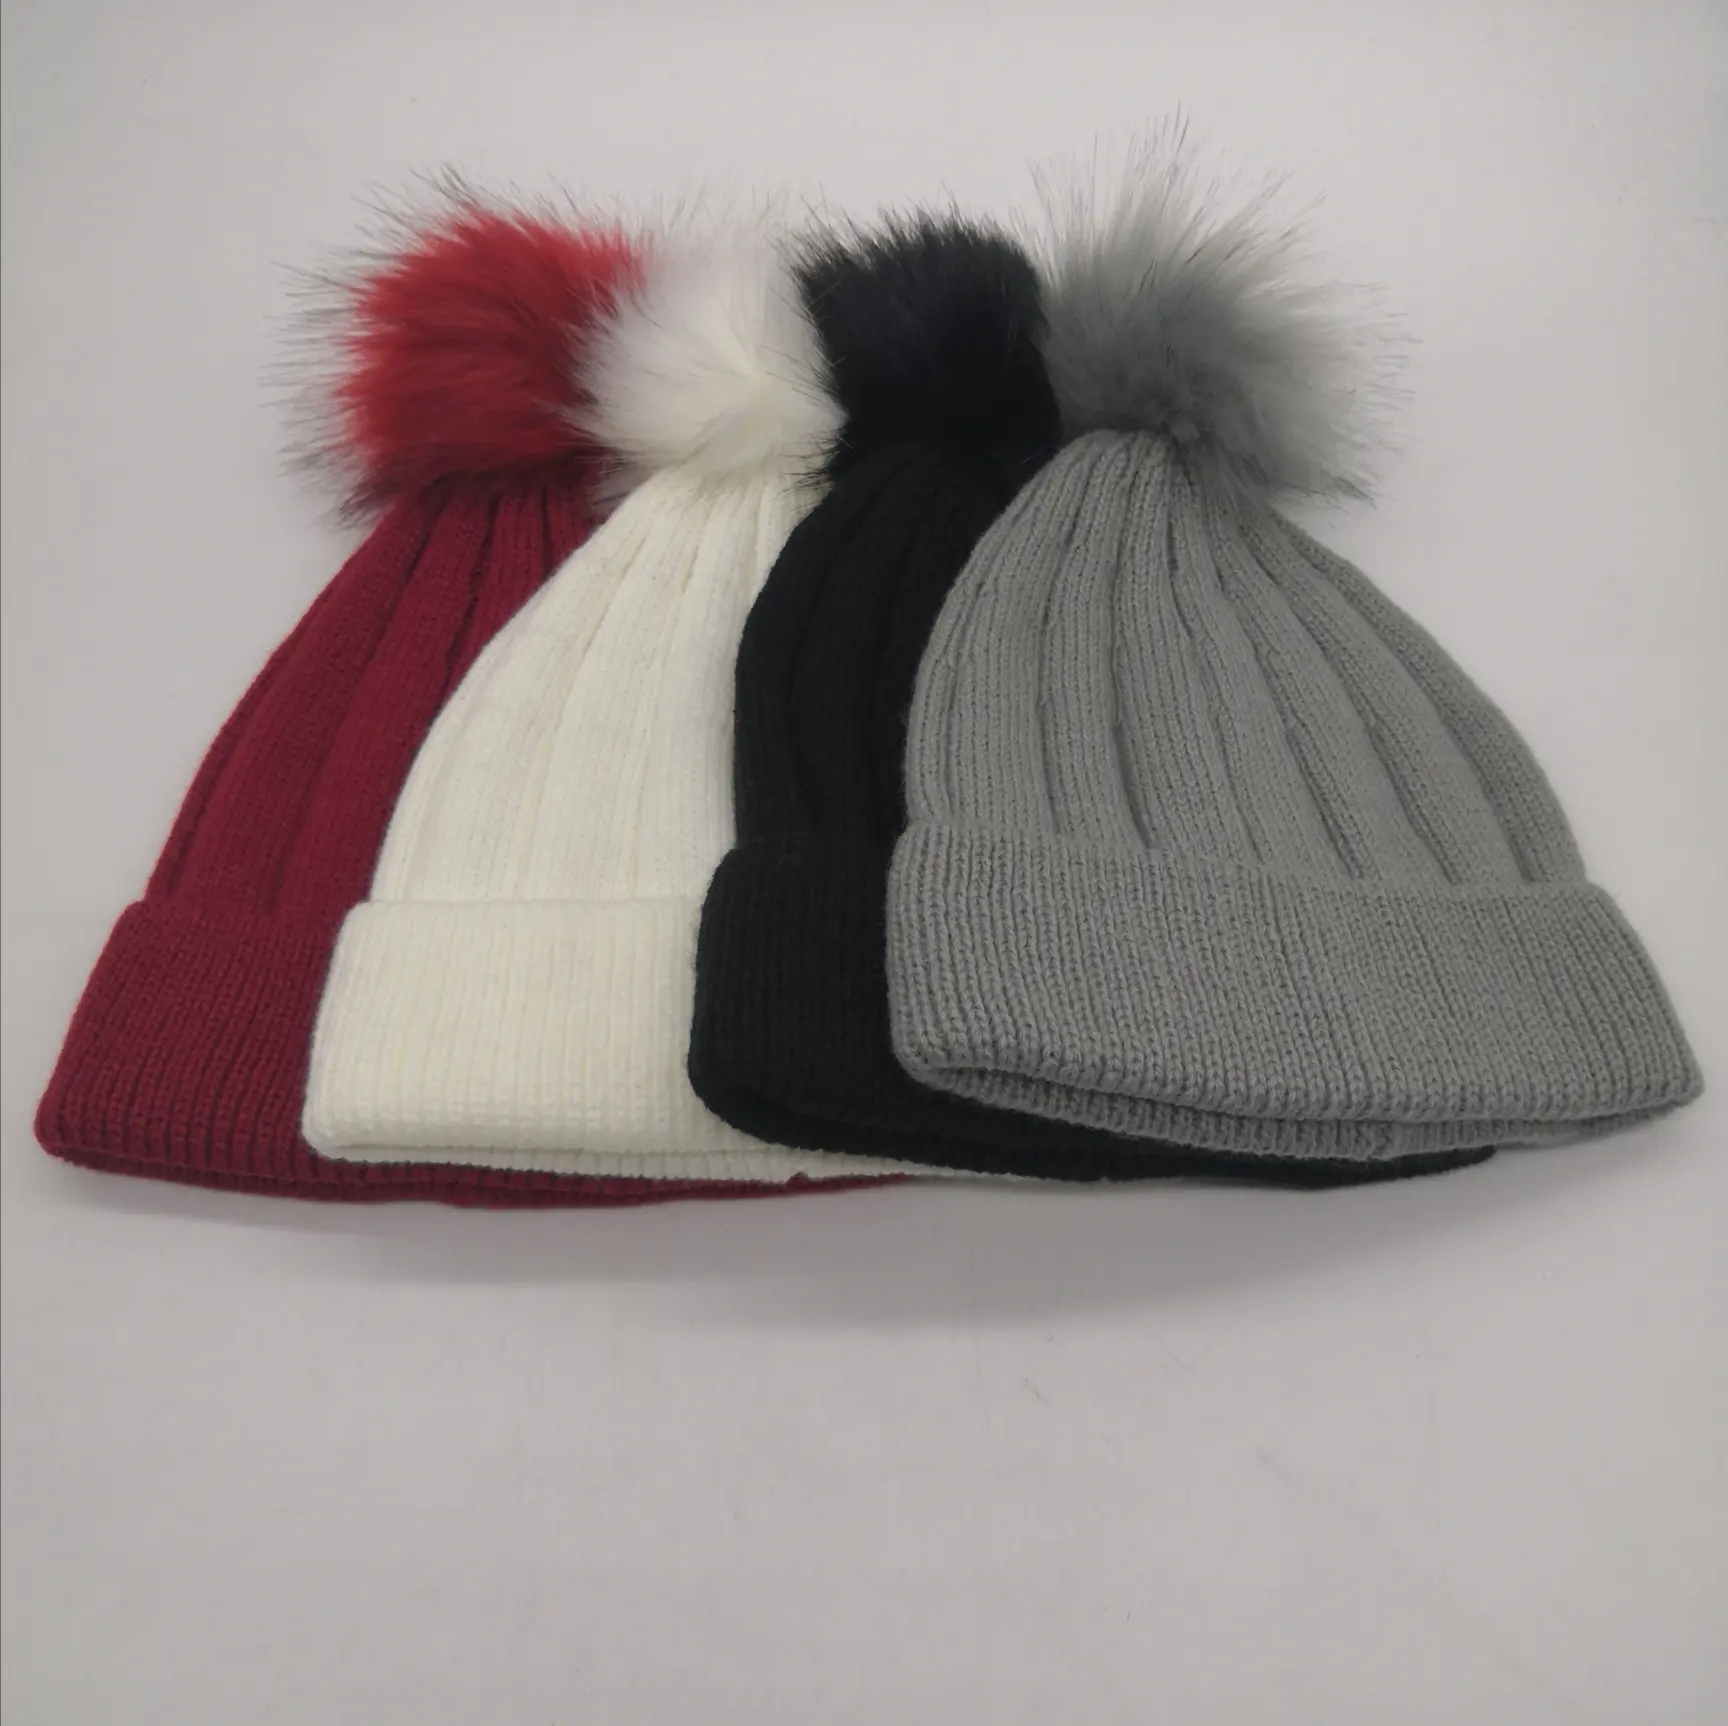 Hot basic soft and warm lady winter knitted acrylic beanie hat with pompom